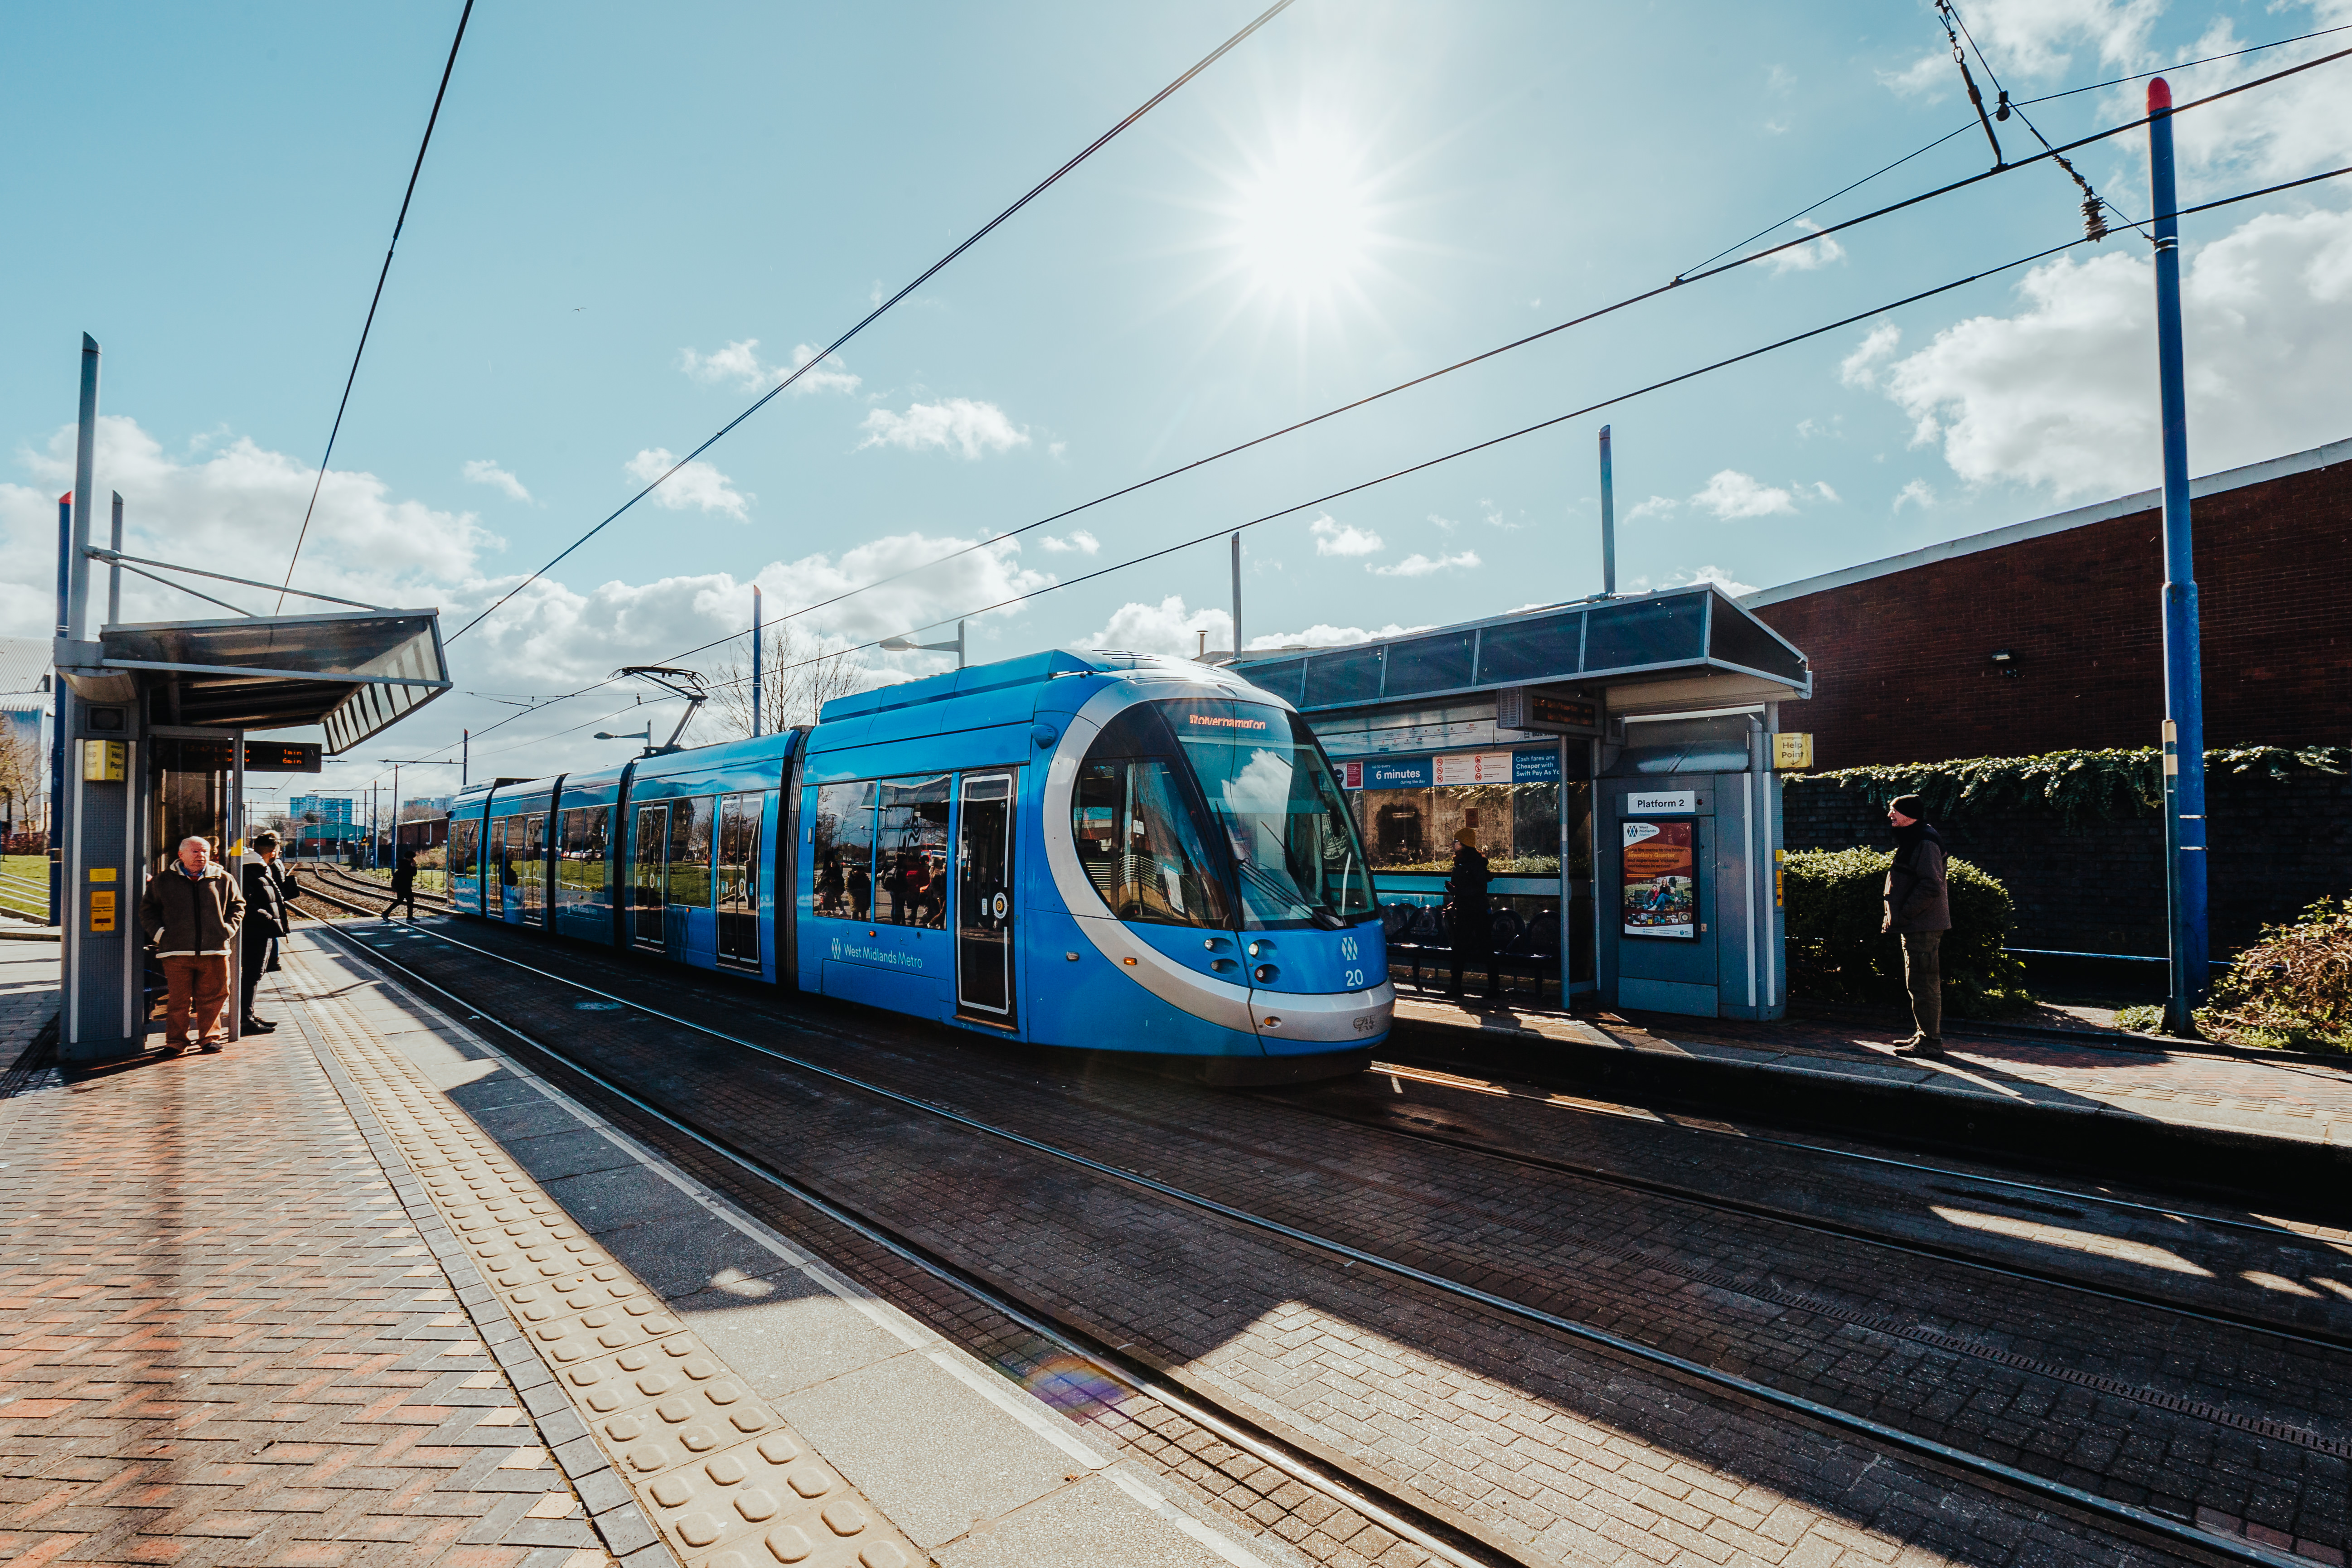 West Midlands Metro blue tram at a stop